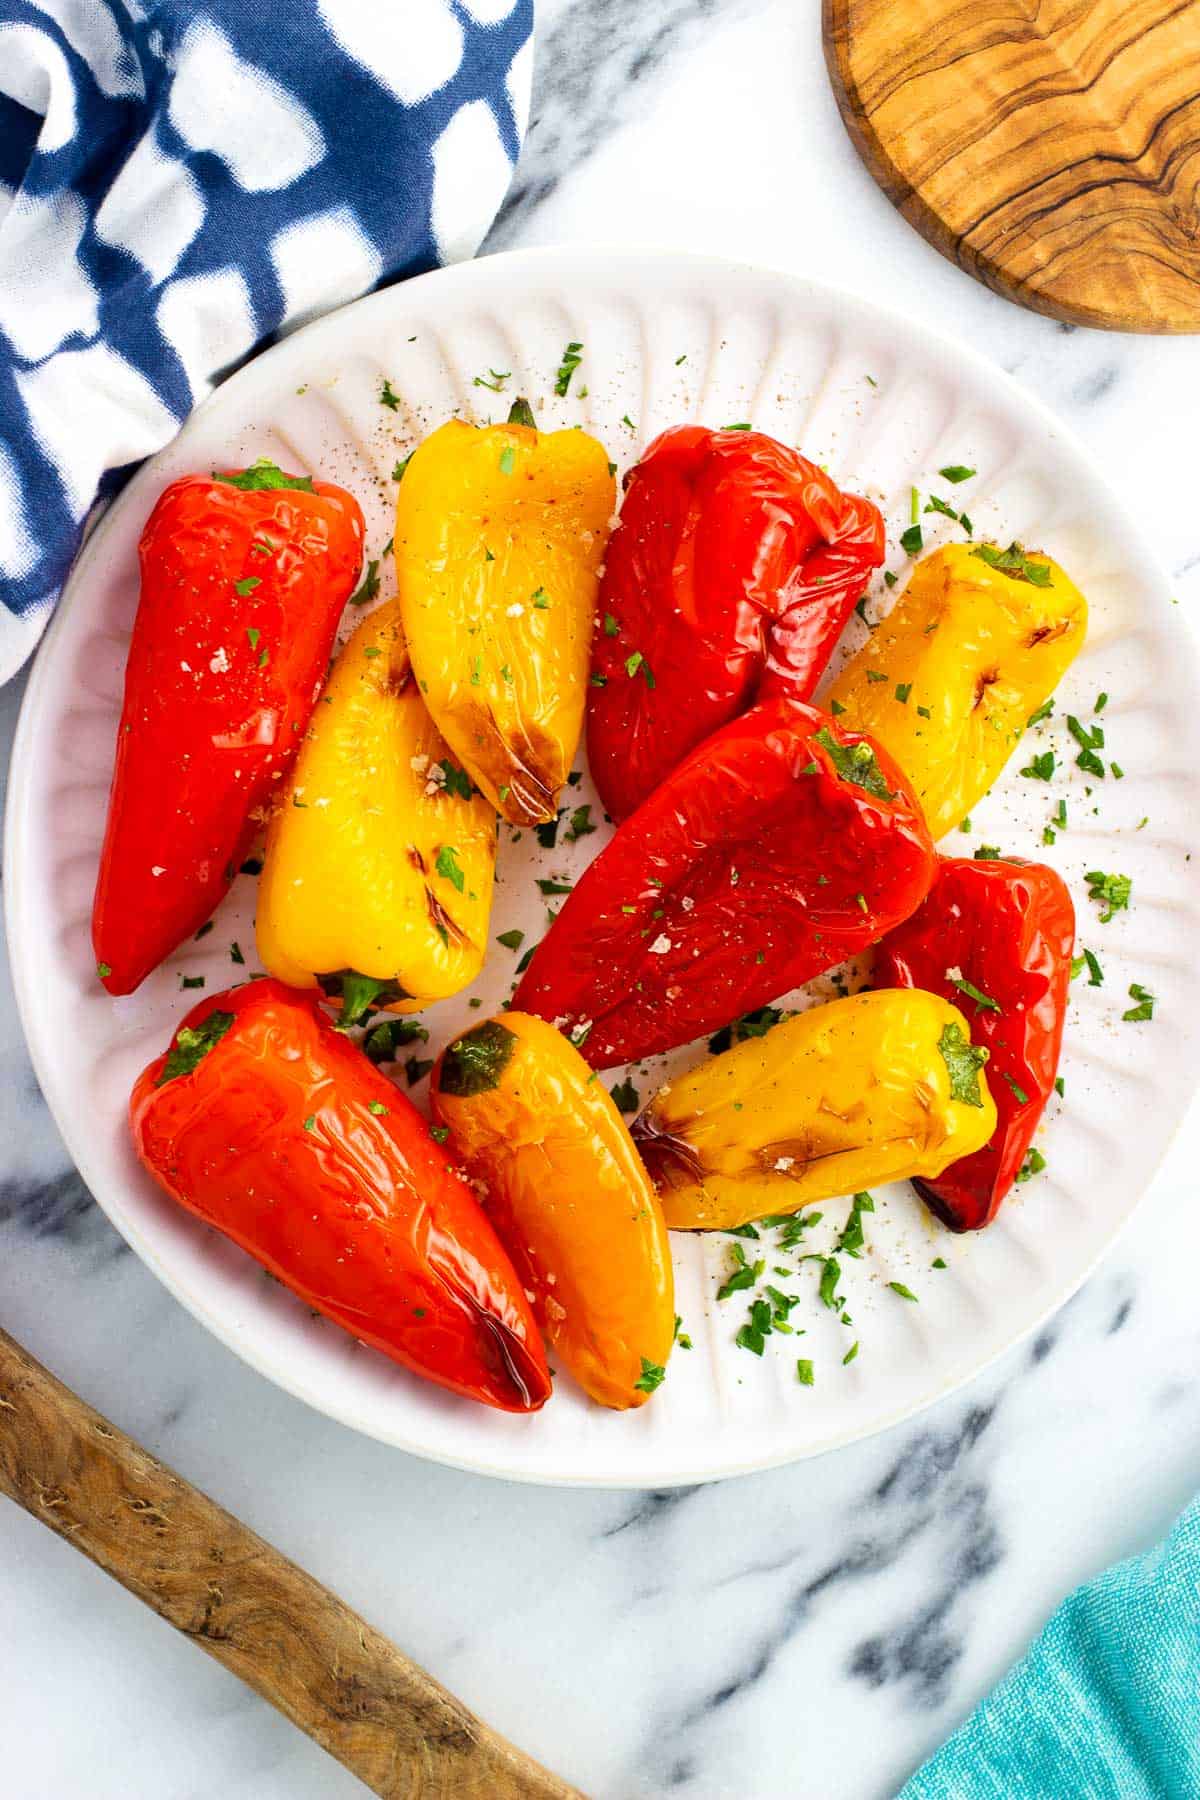 Roasted mini peppers on a serve plate garnished with fresh herbs.